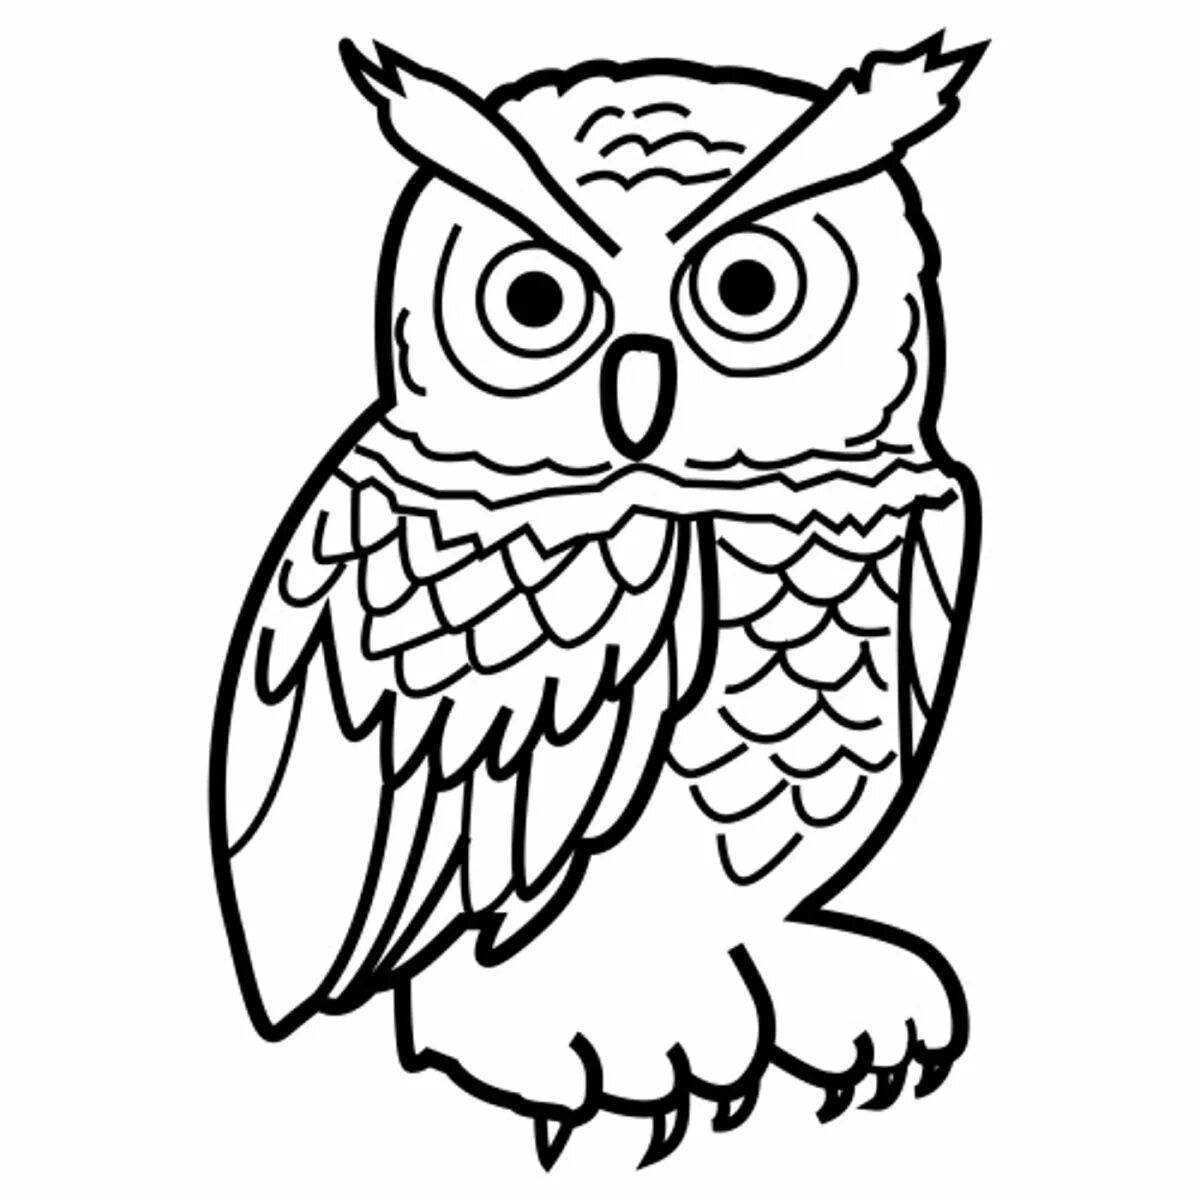 Cute owl coloring pages for 3-4 year olds